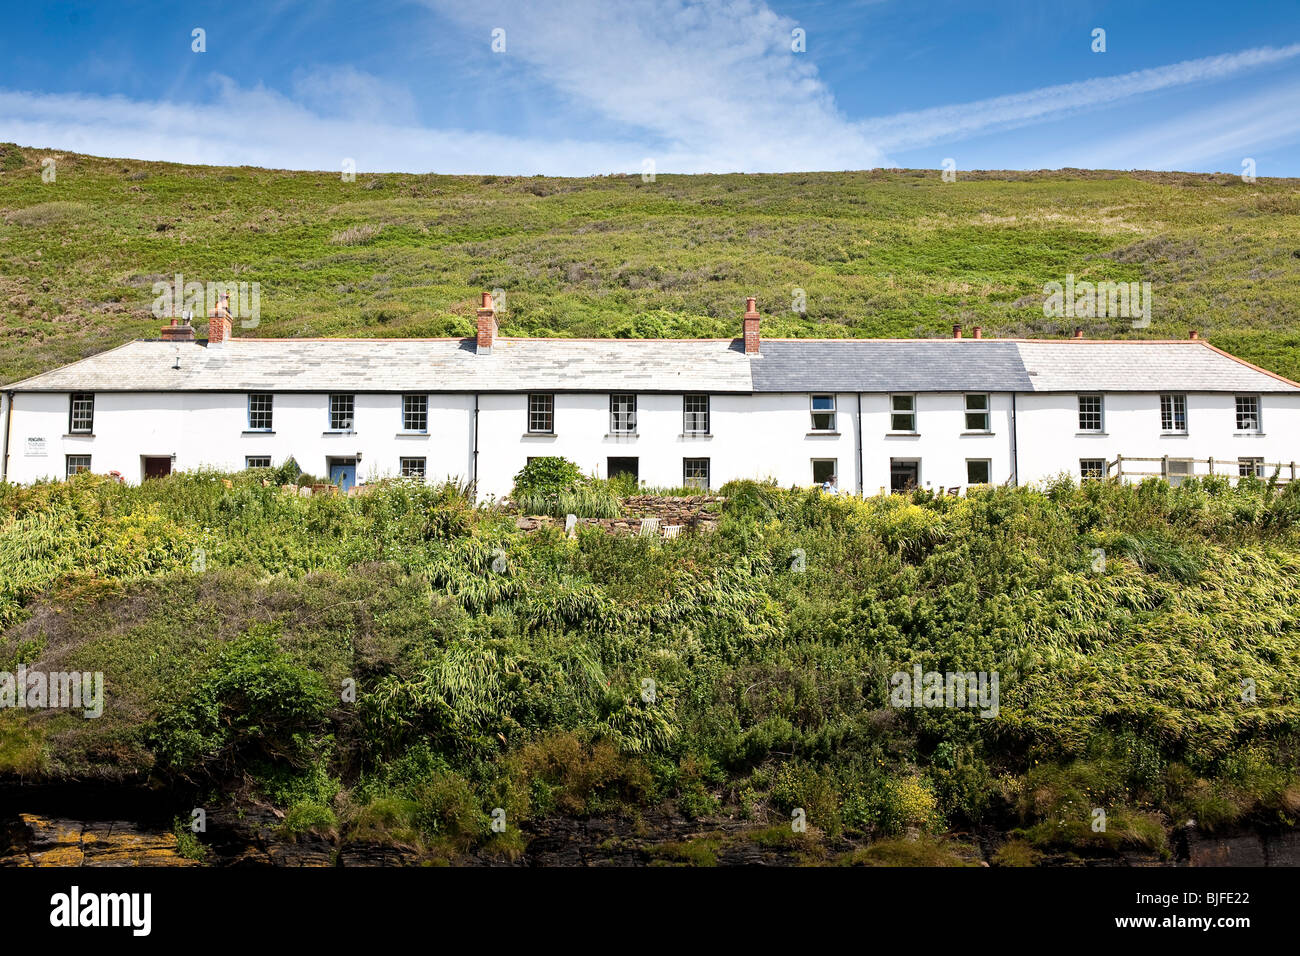 Row of white cottages immersed in heather clad bank with blue sky and feathery cloud, Boscastle, Cornwall. Stock Photo